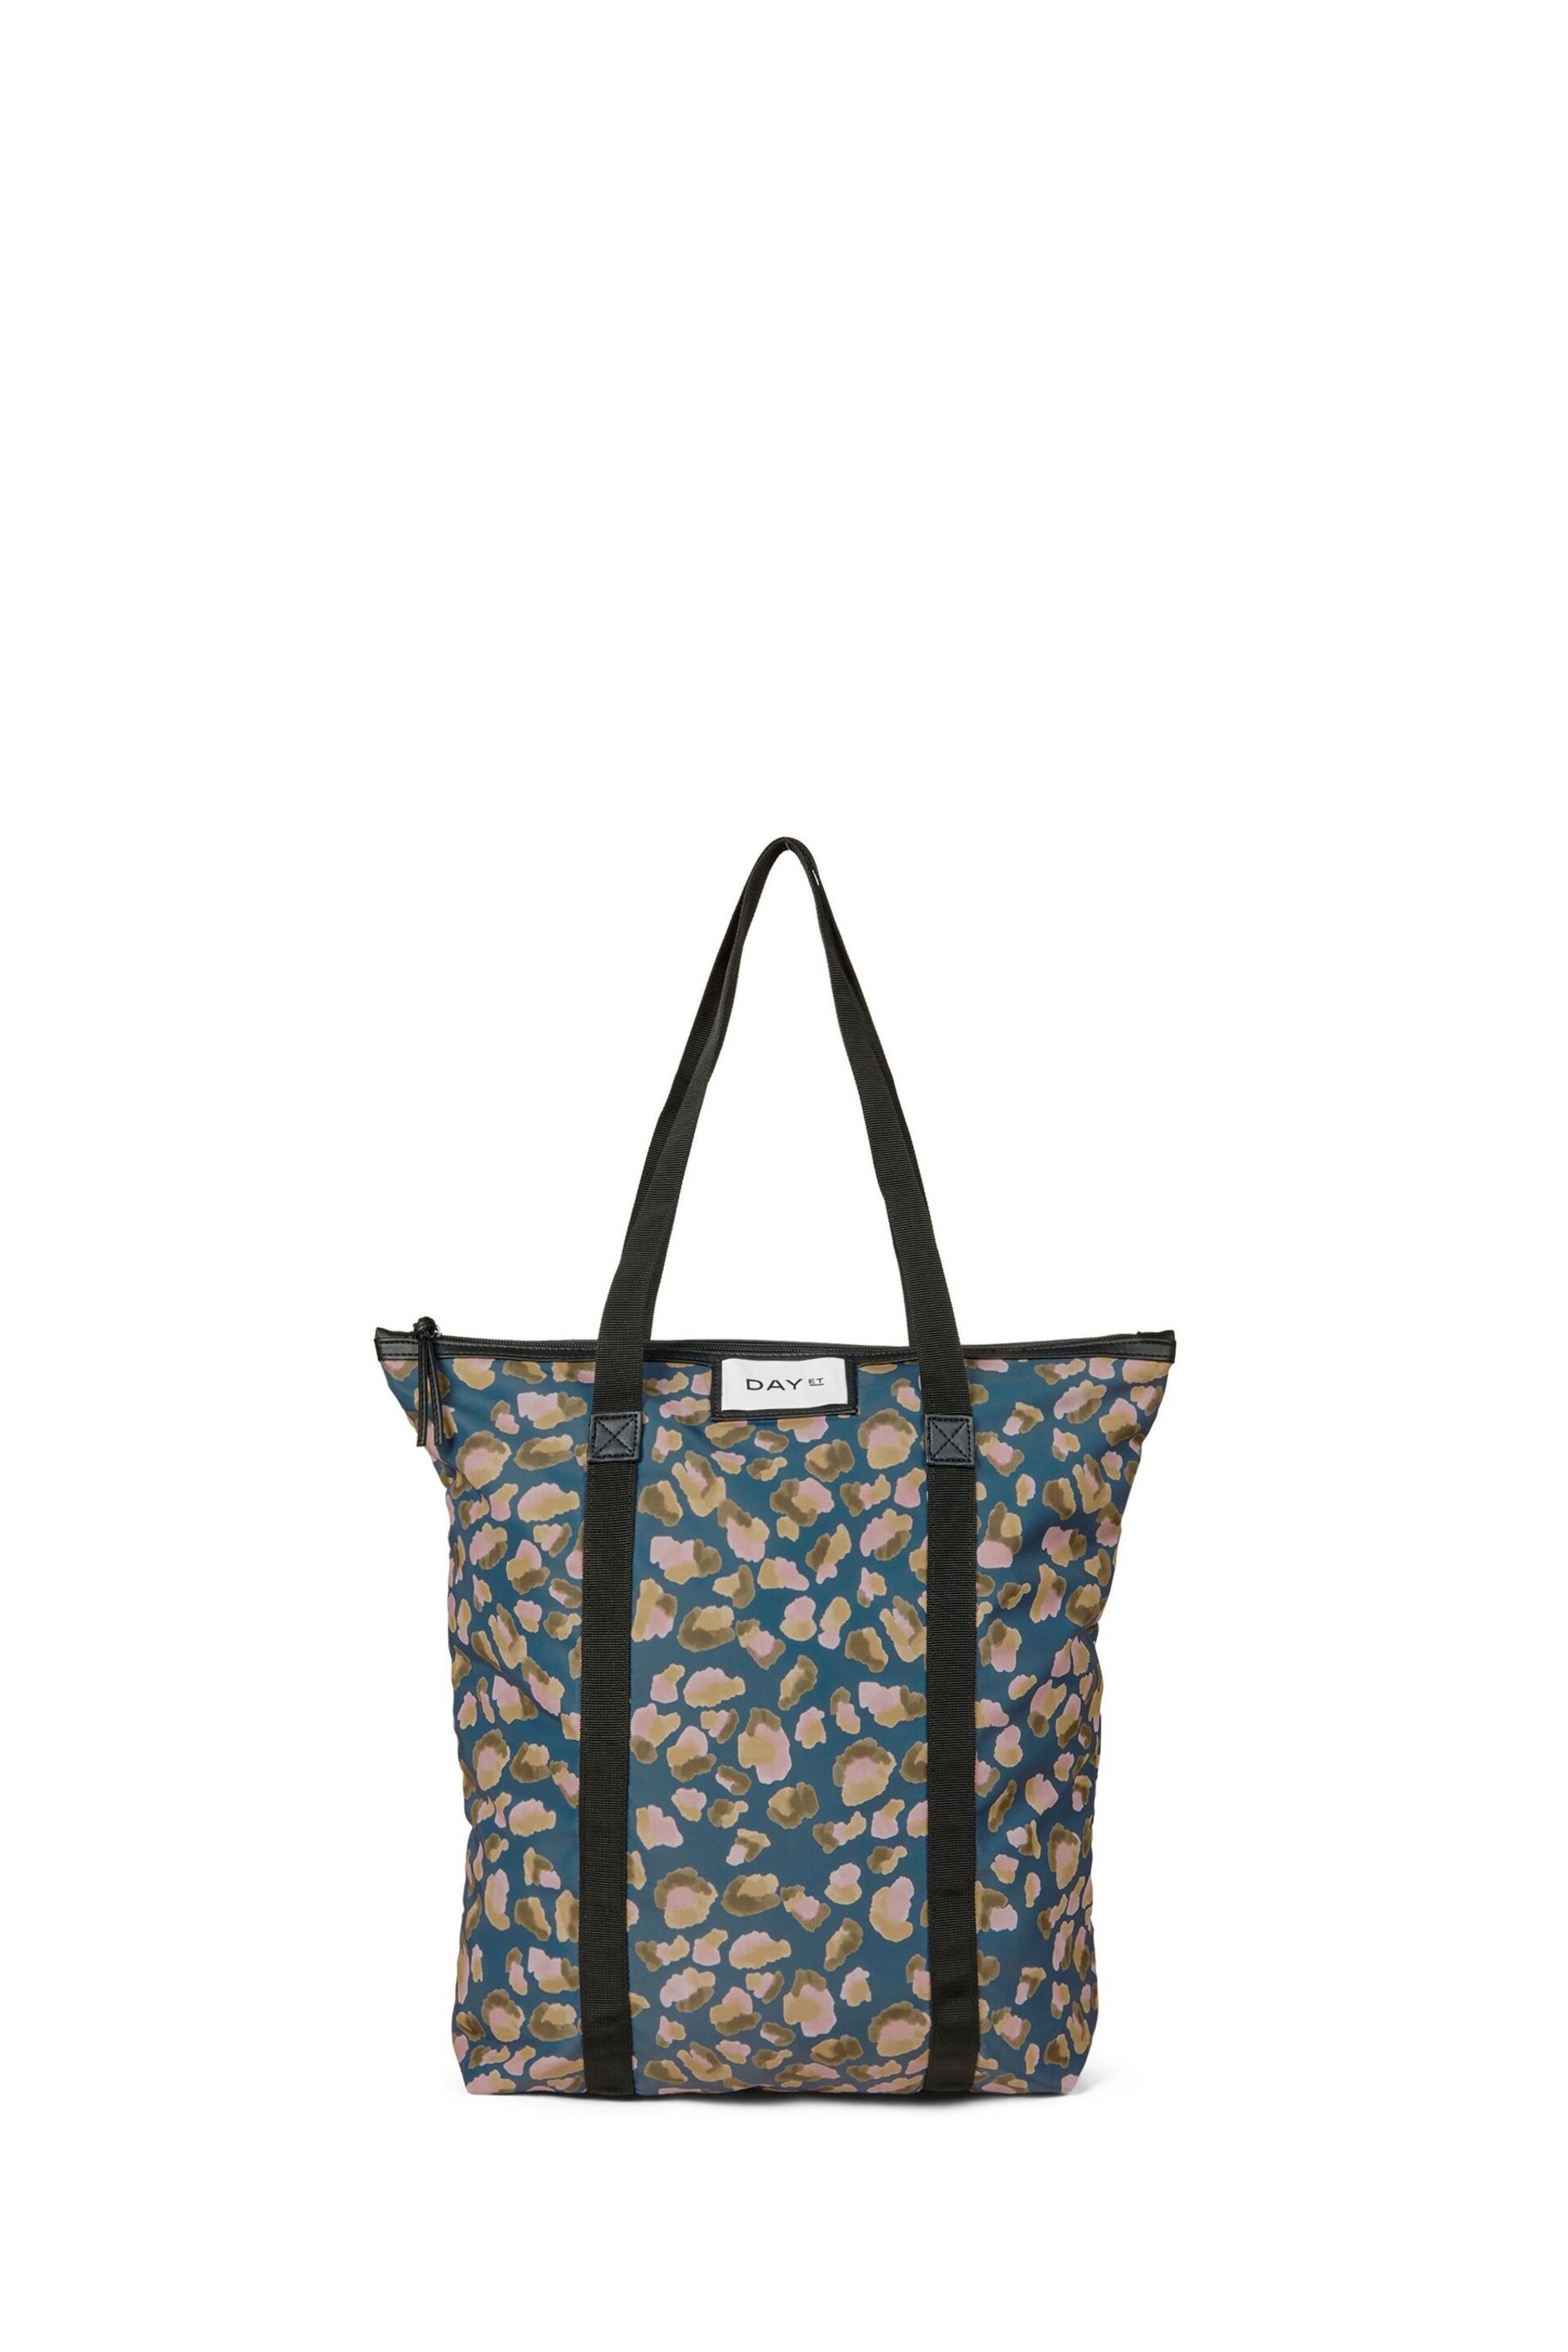 Day Et Grey Gweneth RE-P Duree Tote - Image 2 of 3